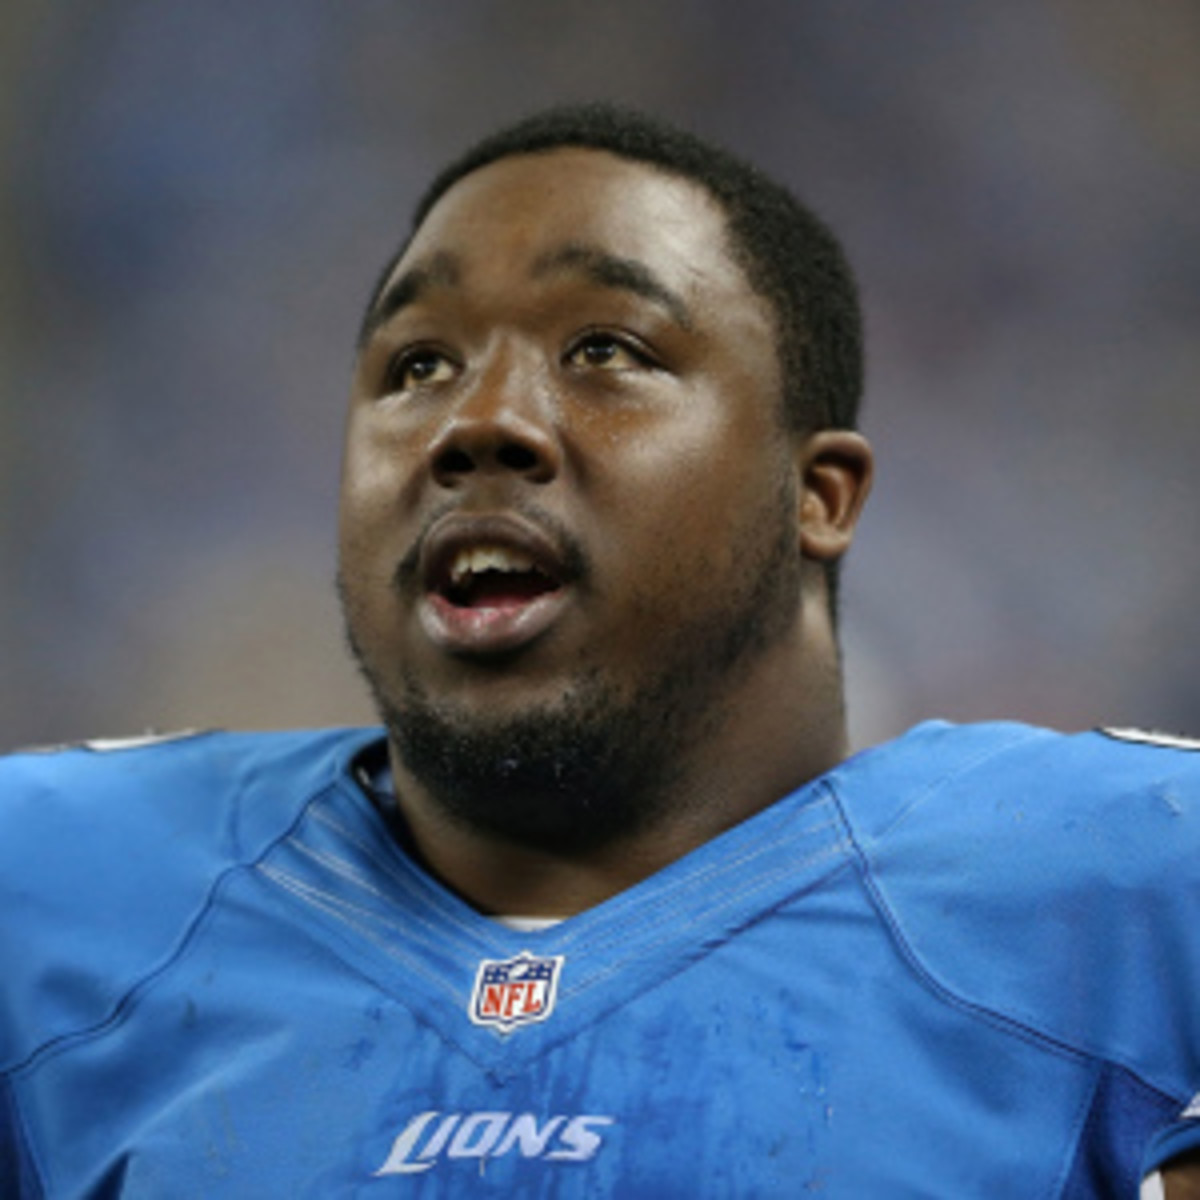 Nick Fairley expects the Lions to make it to the Super Bowl next season. (Leon Halip/Getty Images)